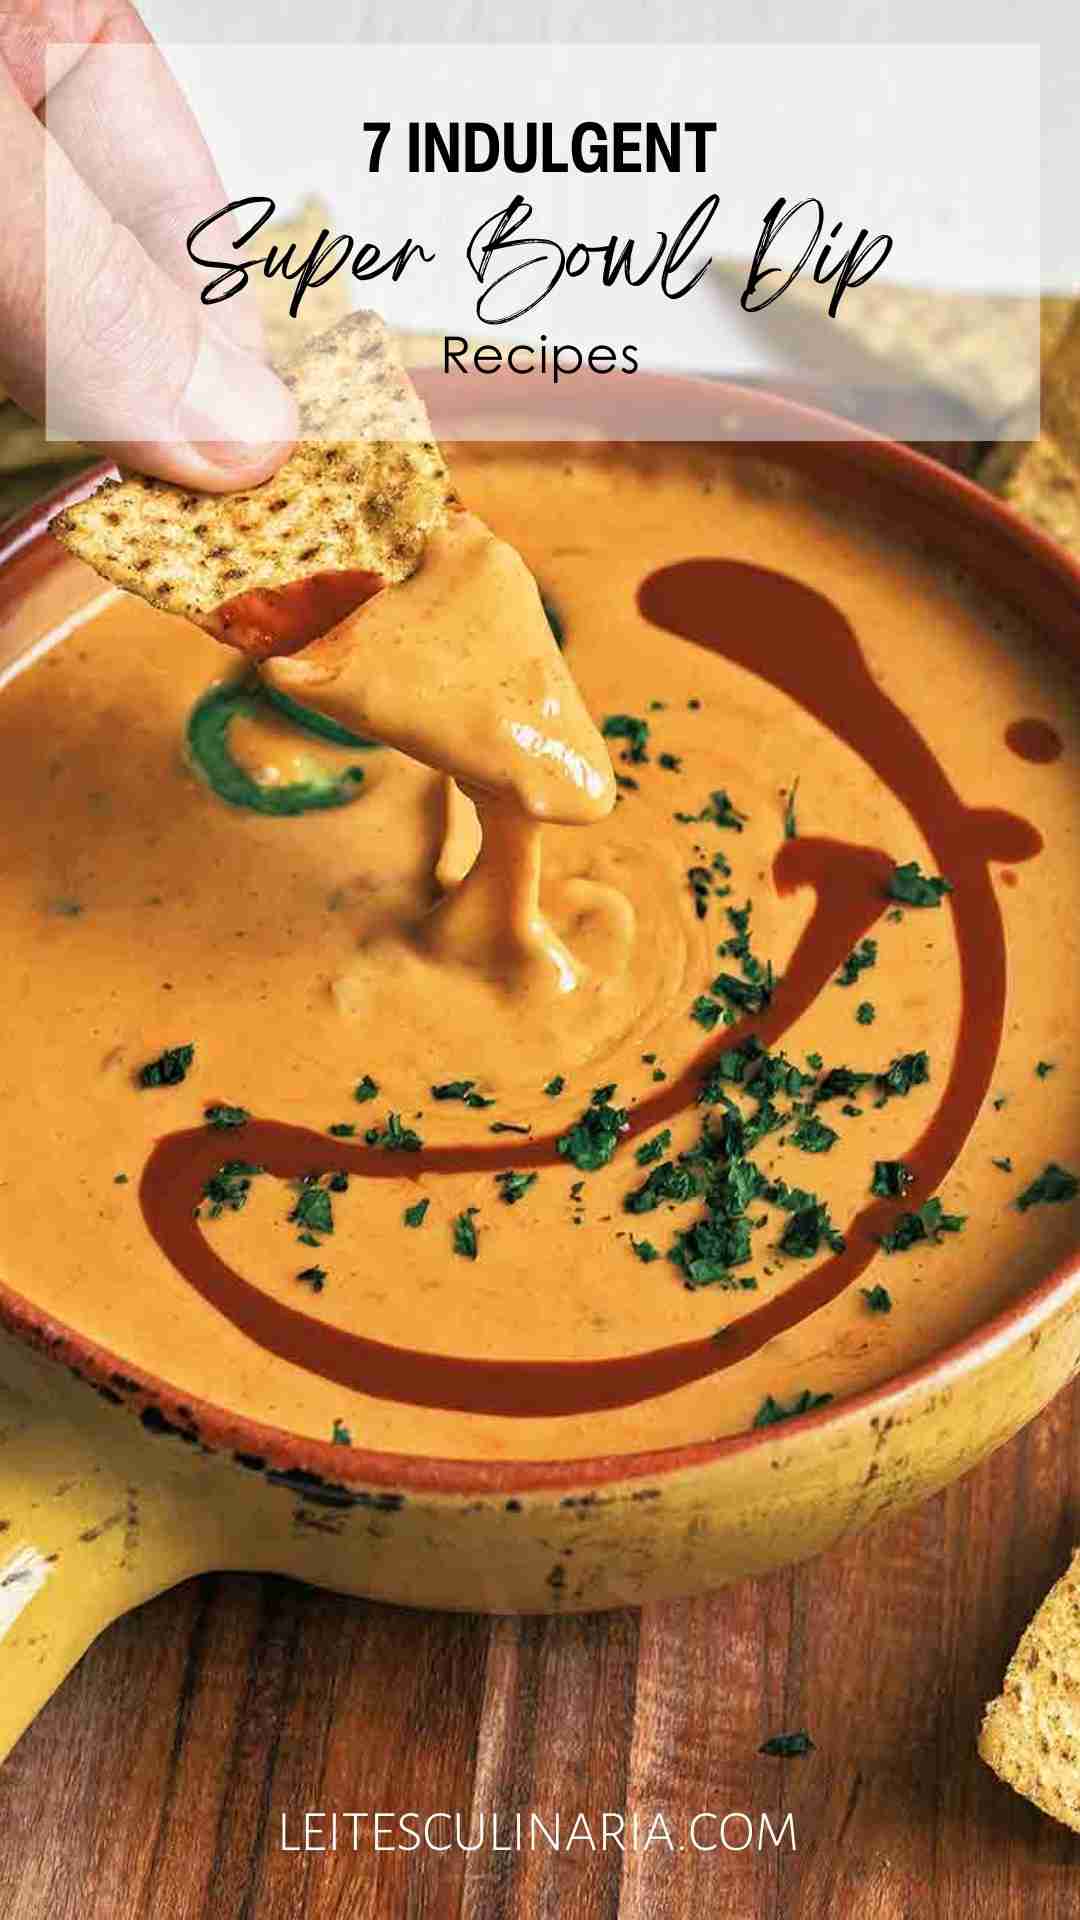 A person scooping cheese dip from a dish.